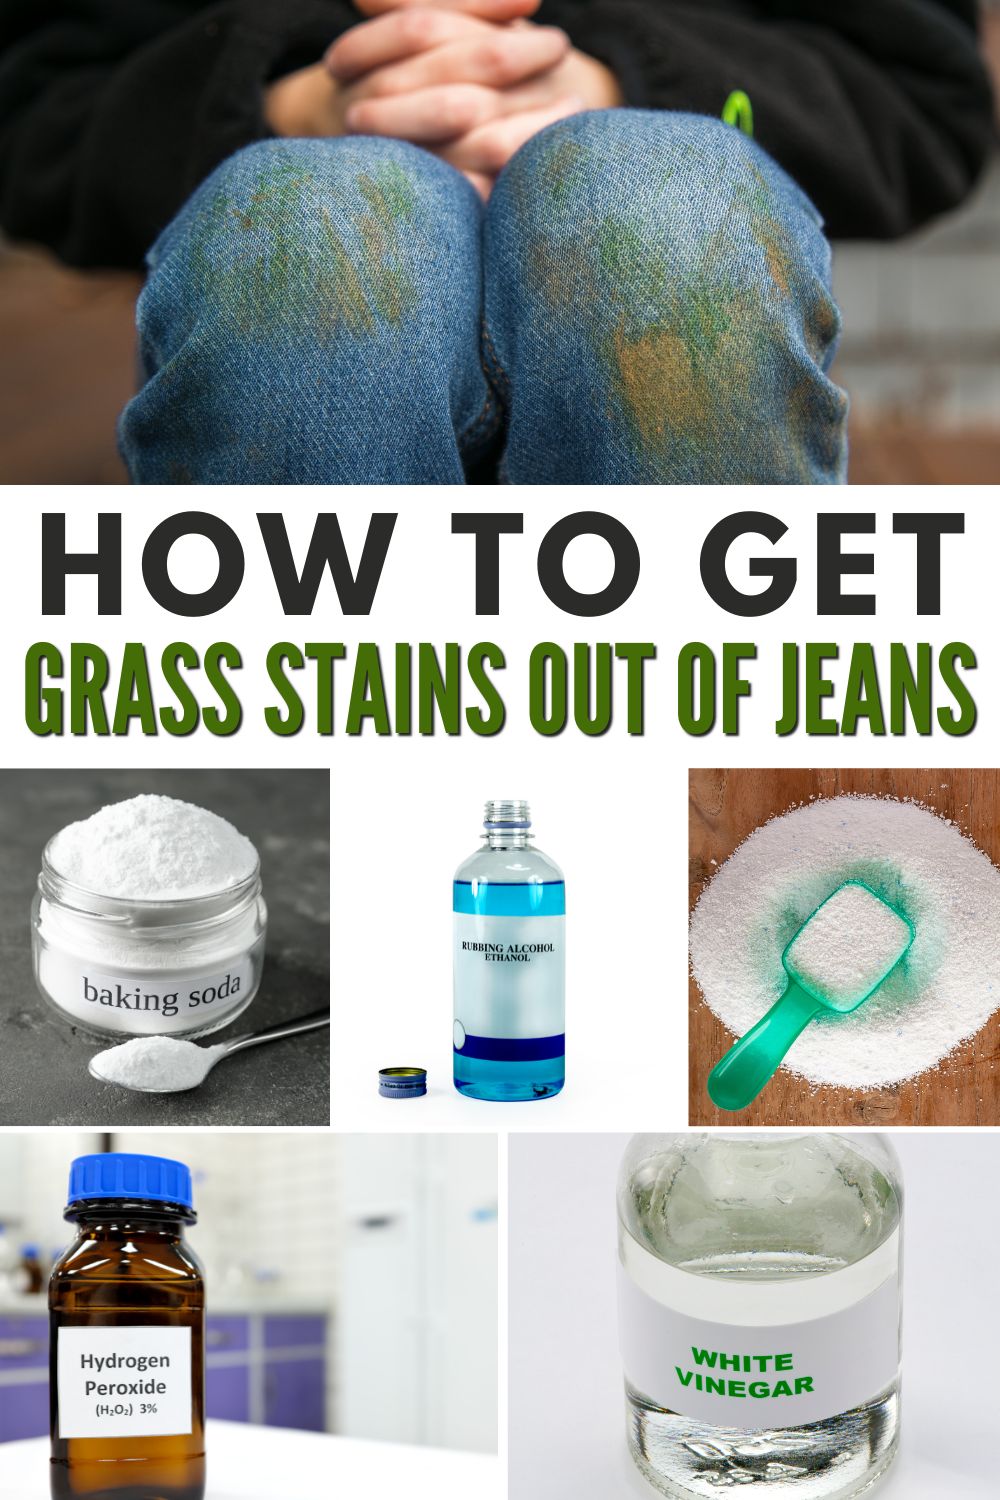 Learn effective methods for removing grass stains from jeans.